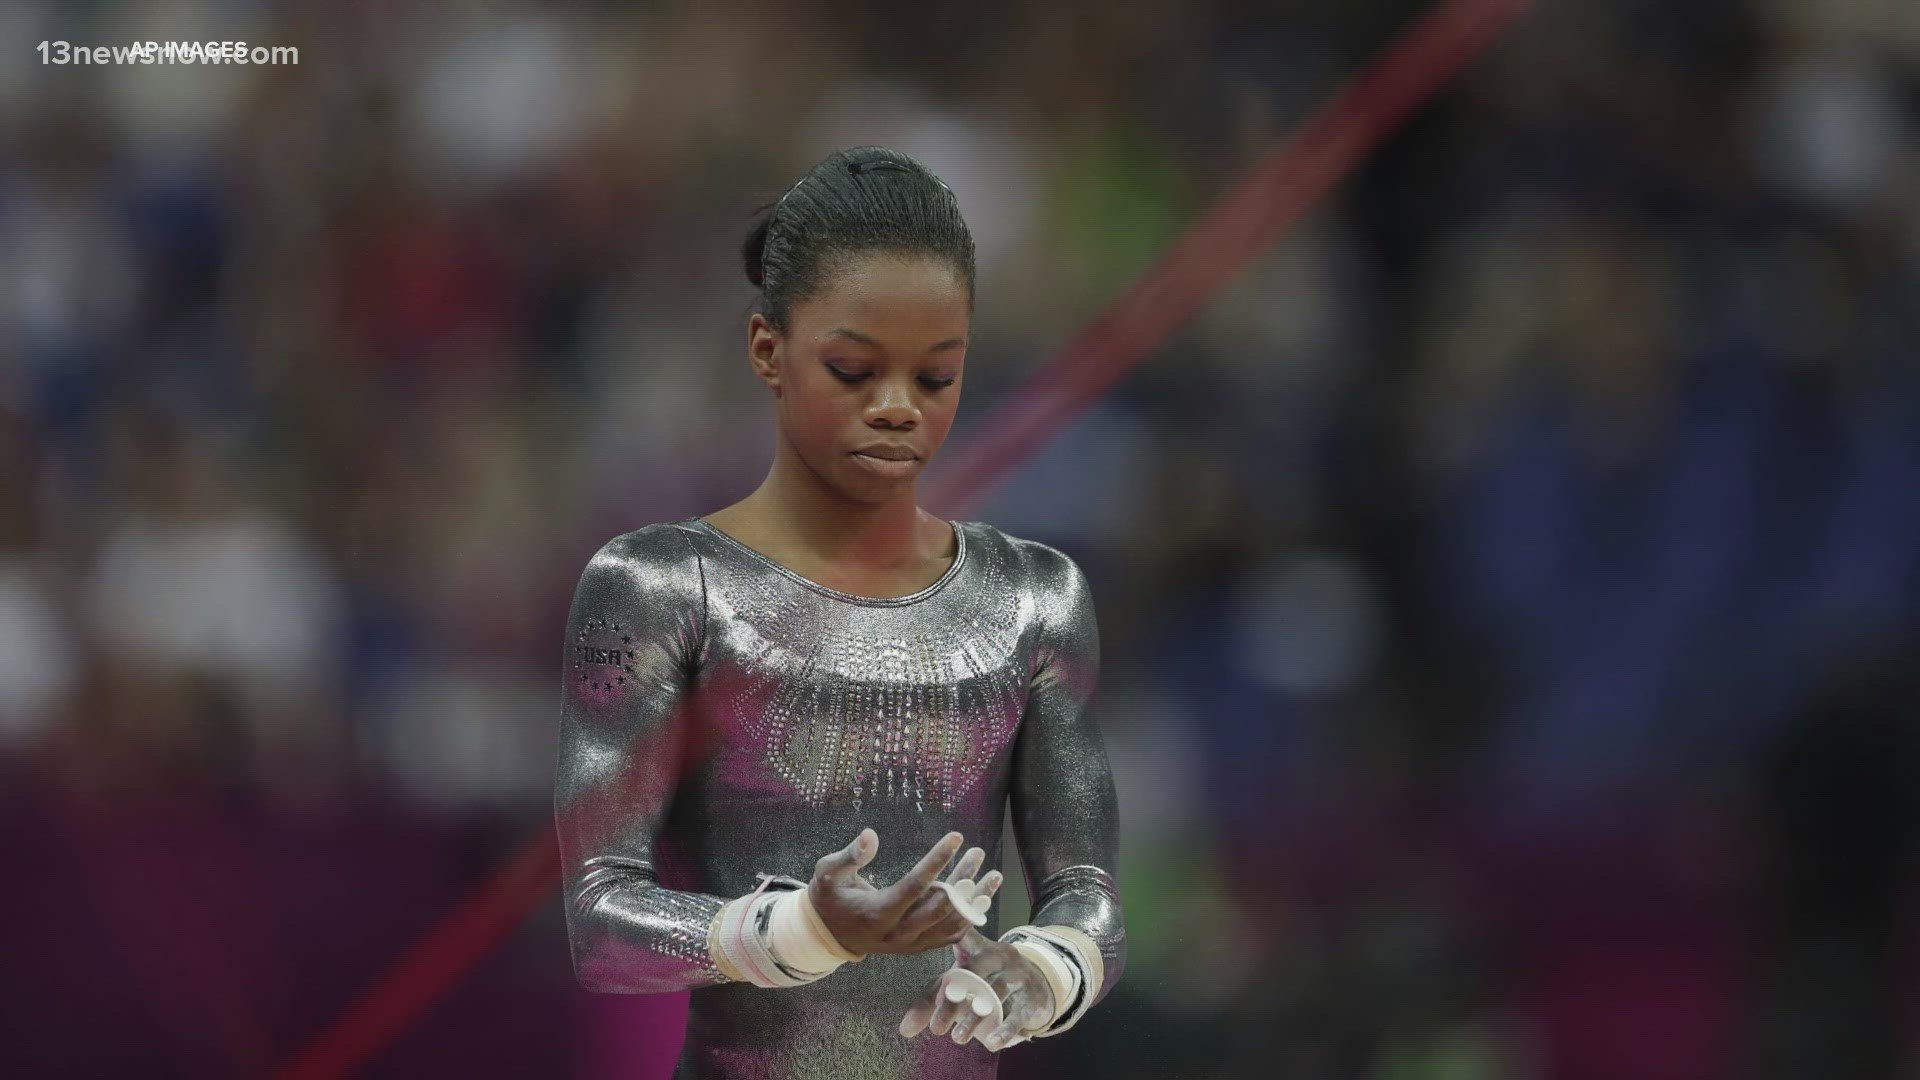 The now 27-year-old Hampton Roads native was the first Black woman to win the Olympic all-around gymnastics title.